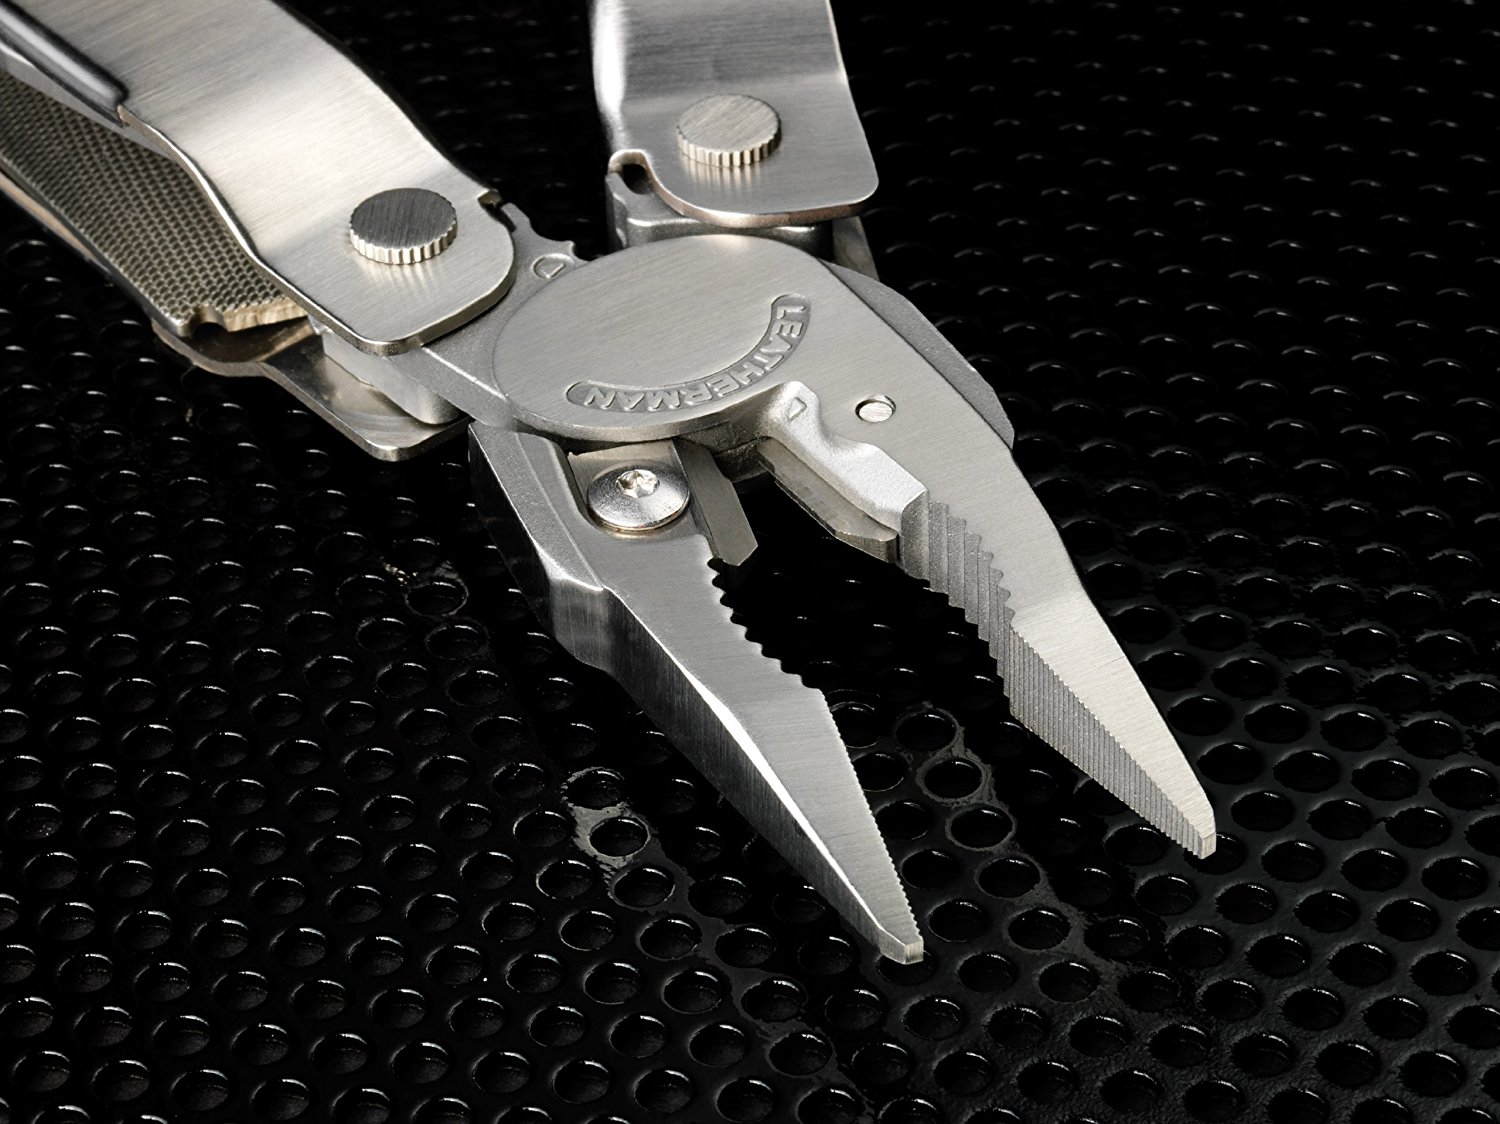 Leatherman Super Tool 300 -Reviewed by Gary